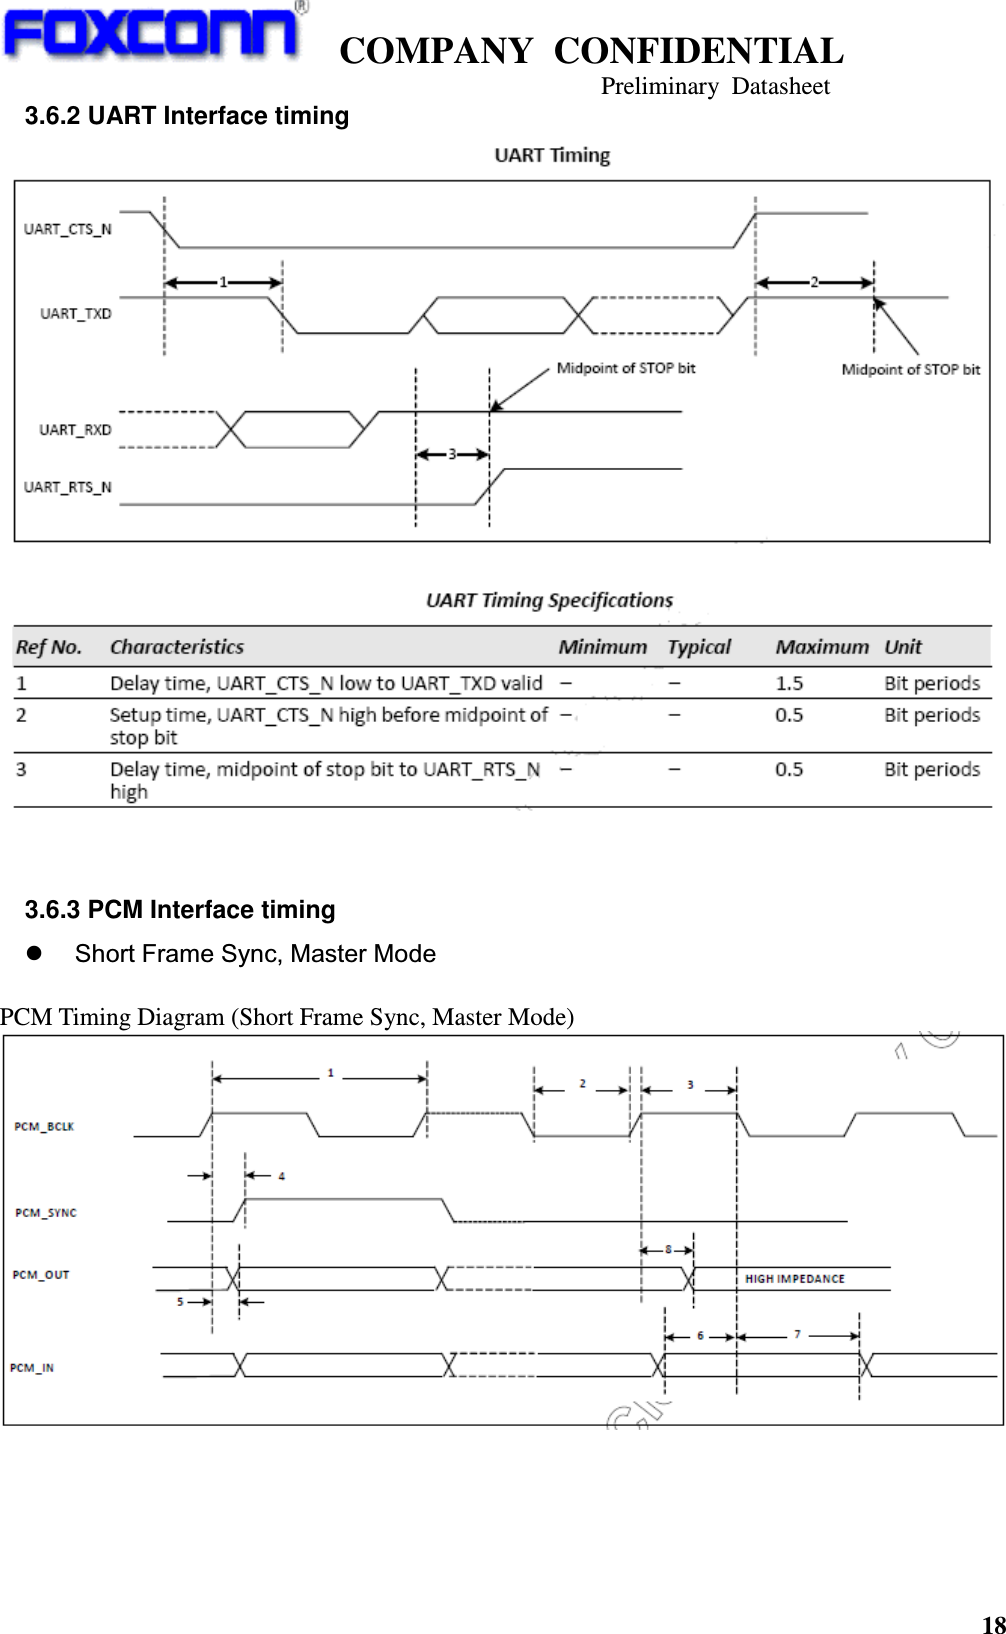    COMPANY  CONFIDENTIAL                                                                     Preliminary  Datasheet 18  3.6.2 UART Interface timing   3.6.3 PCM Interface timing  Short Frame Sync, Master Mode  PCM Timing Diagram (Short Frame Sync, Master Mode)      